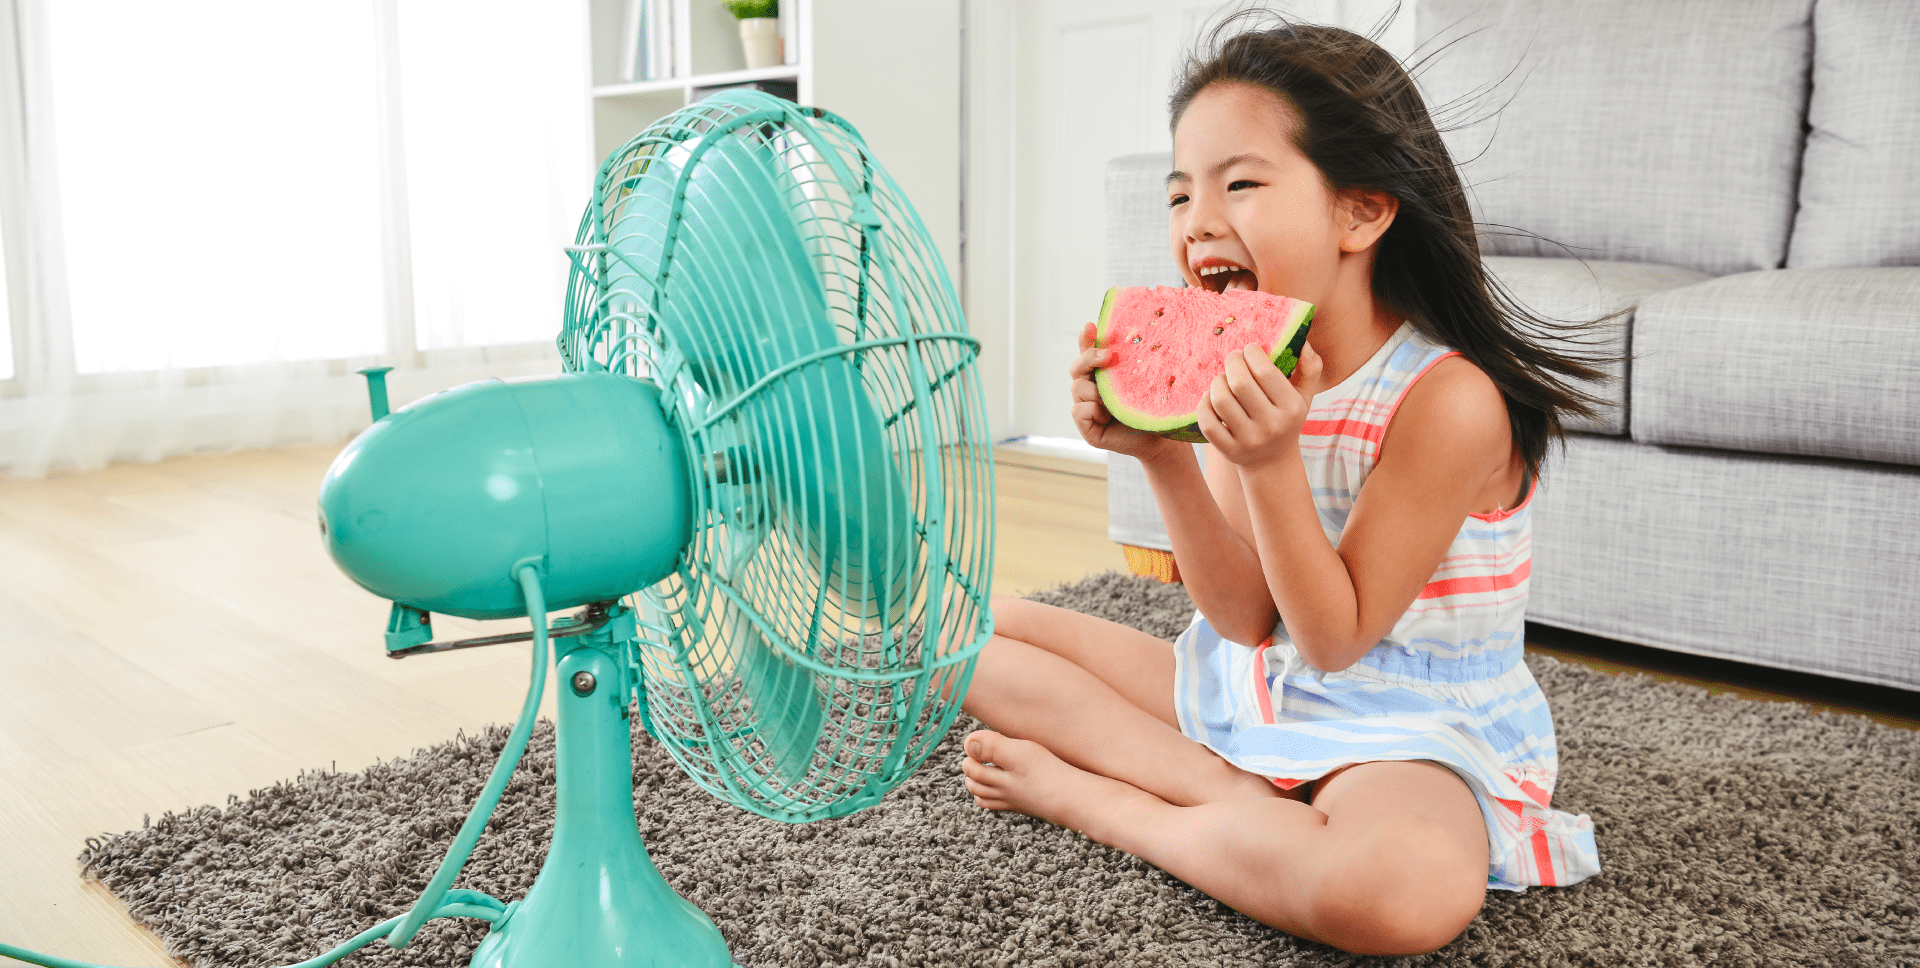 Child sitting on the floor facing a portable room fan and eating a slice of watermelon